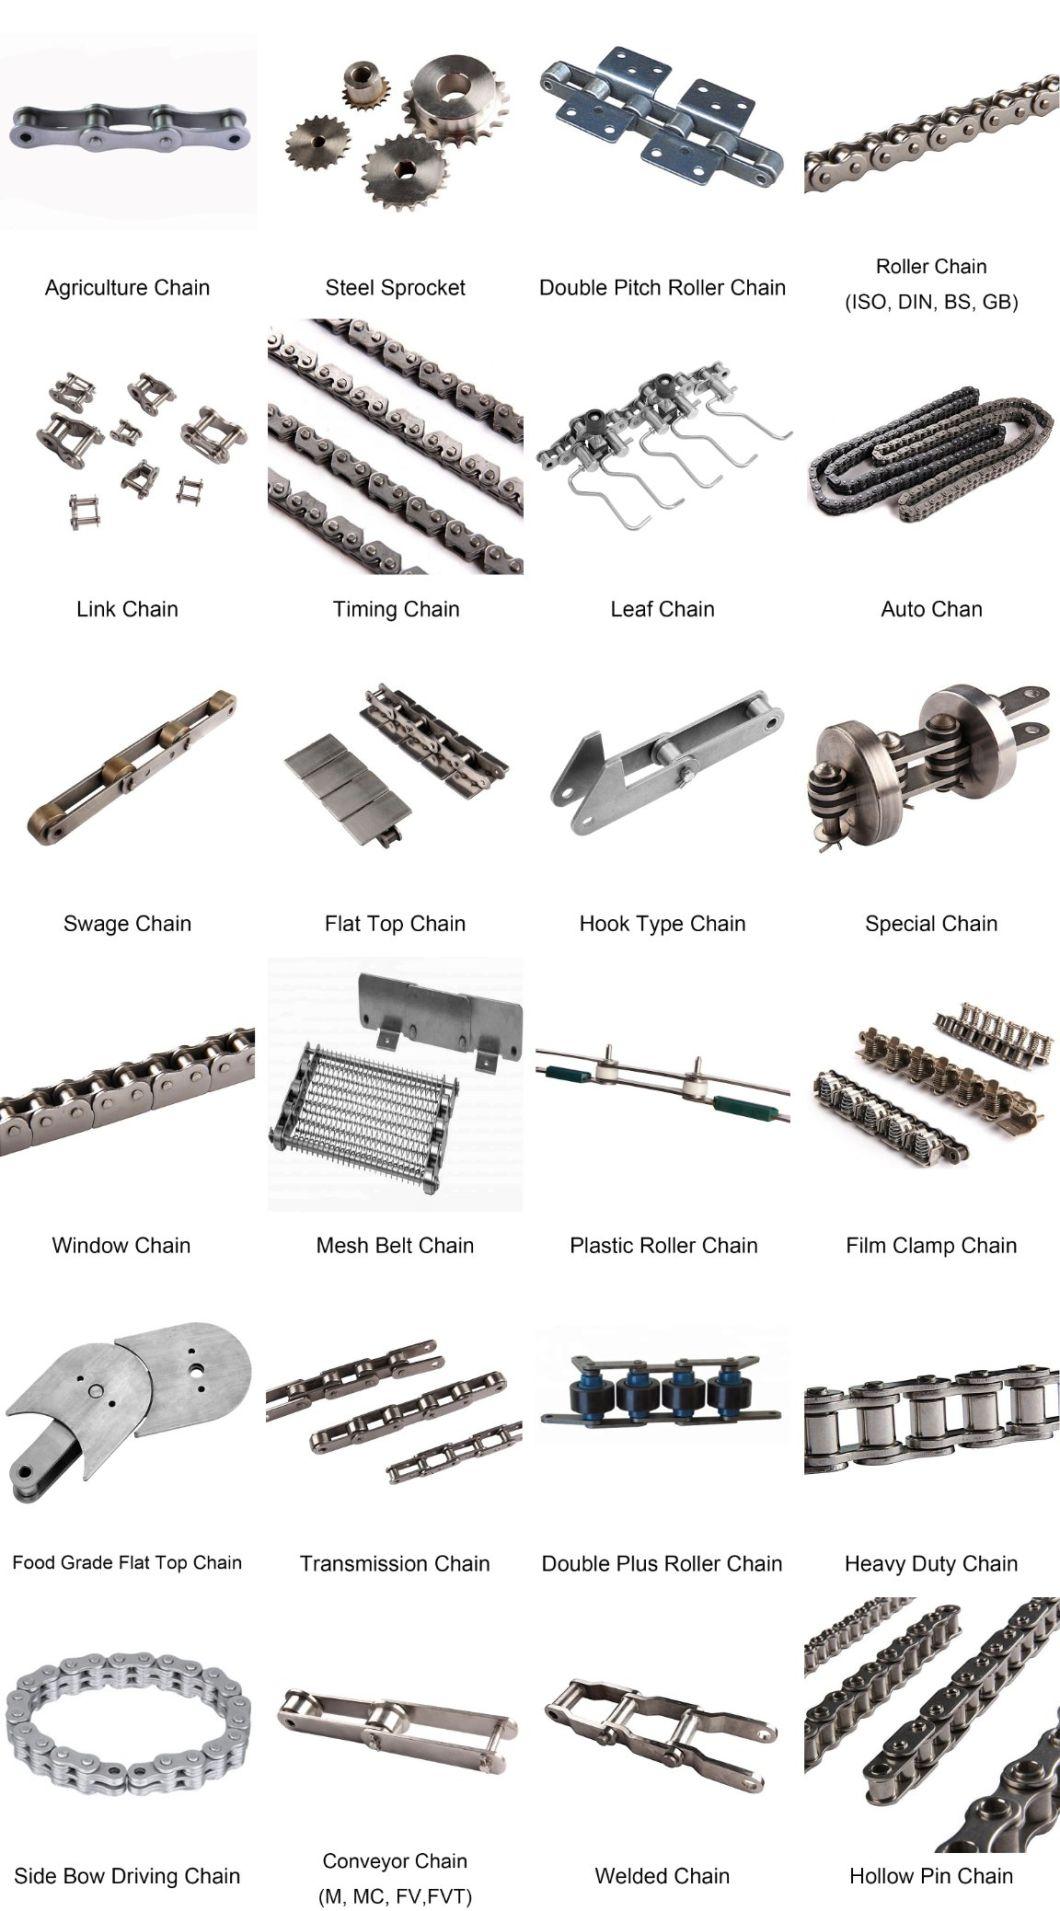 Chain Factory Agricultural Lumber Conveyor Roller Chain Transmission Chain